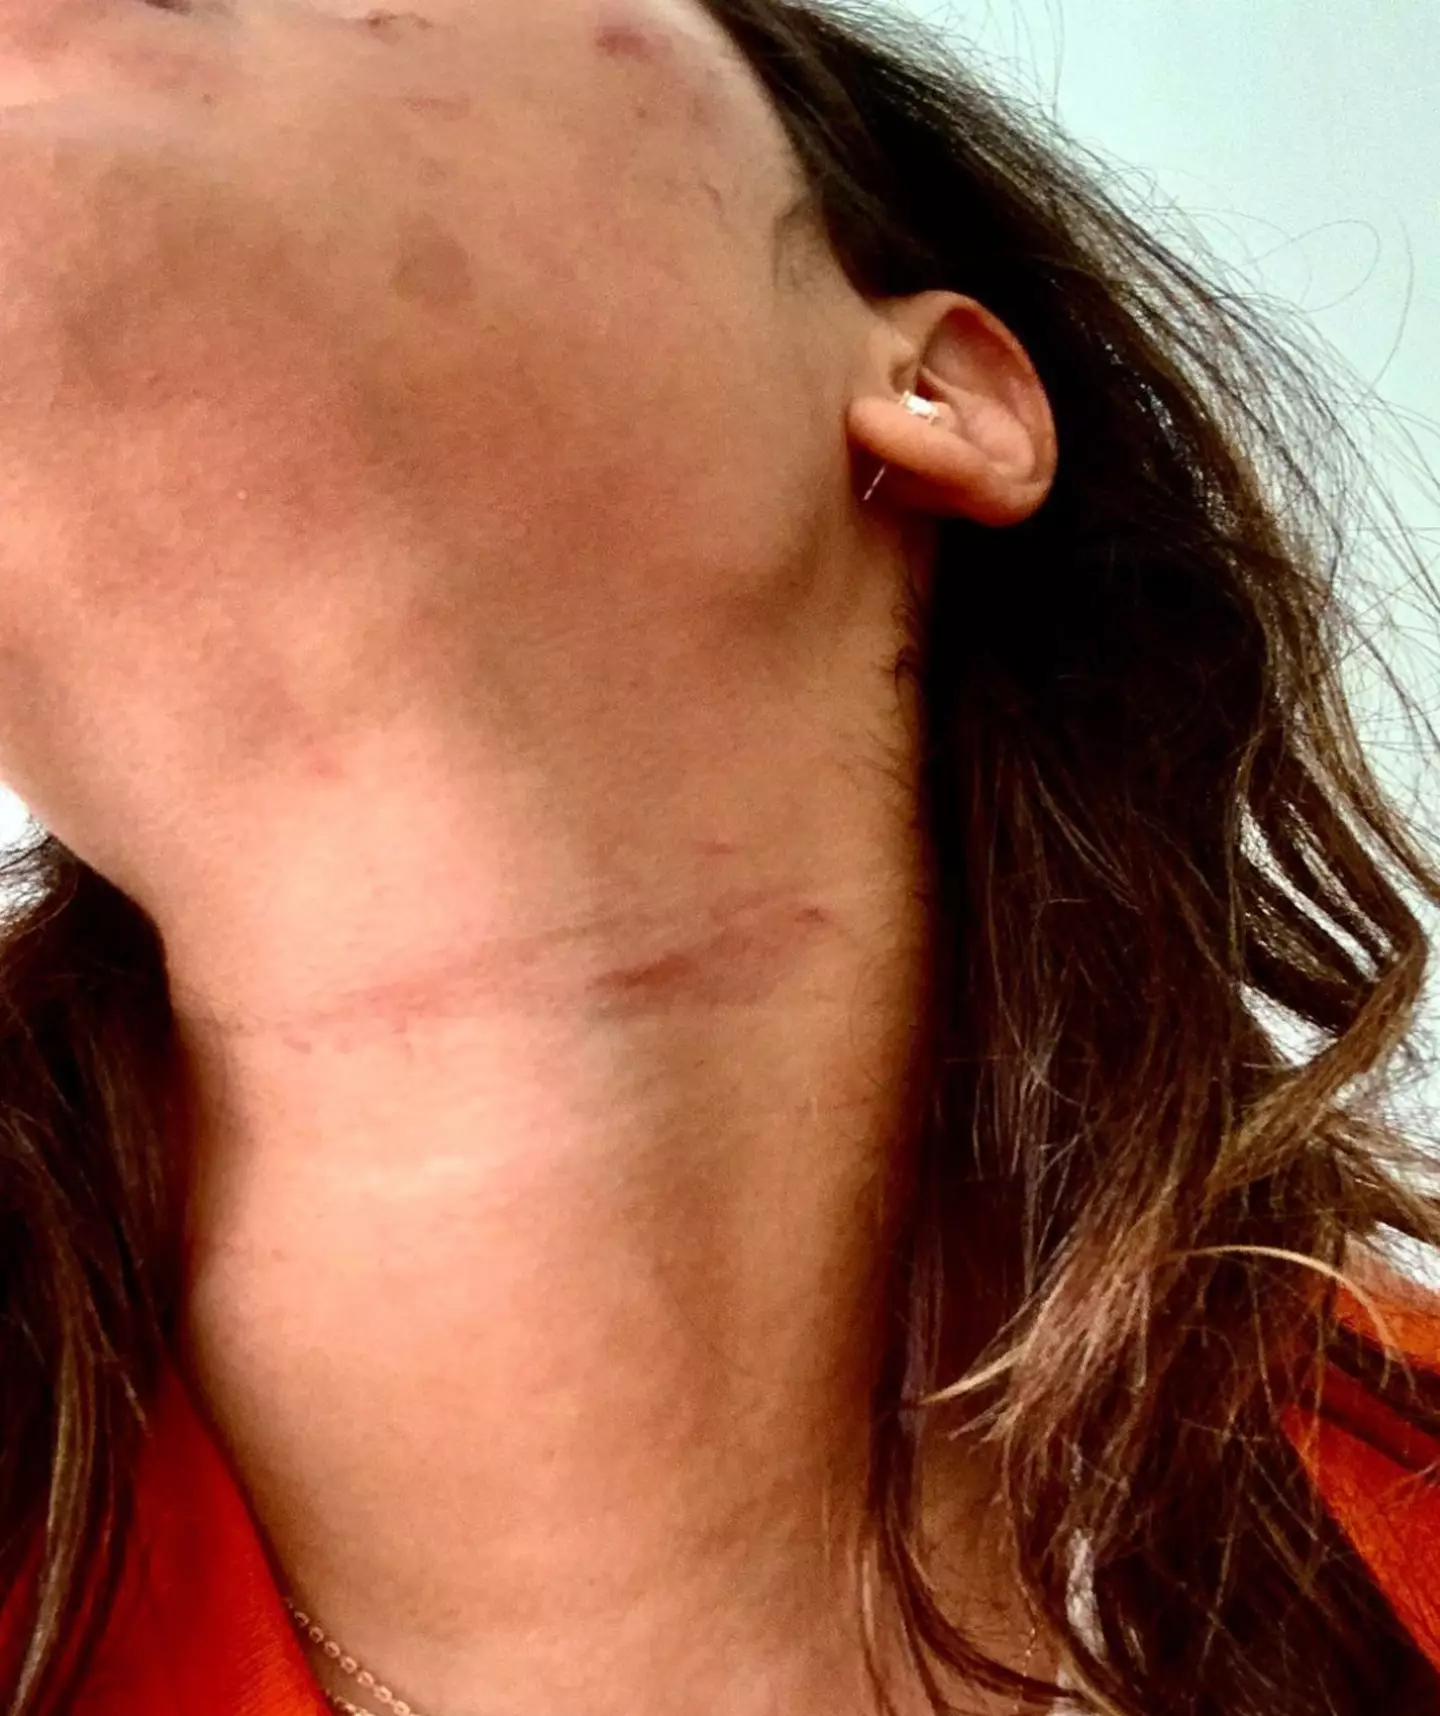 Malin Andersson shared a picture of her neck scars in a brave bid to start a conversation on domestic violence.